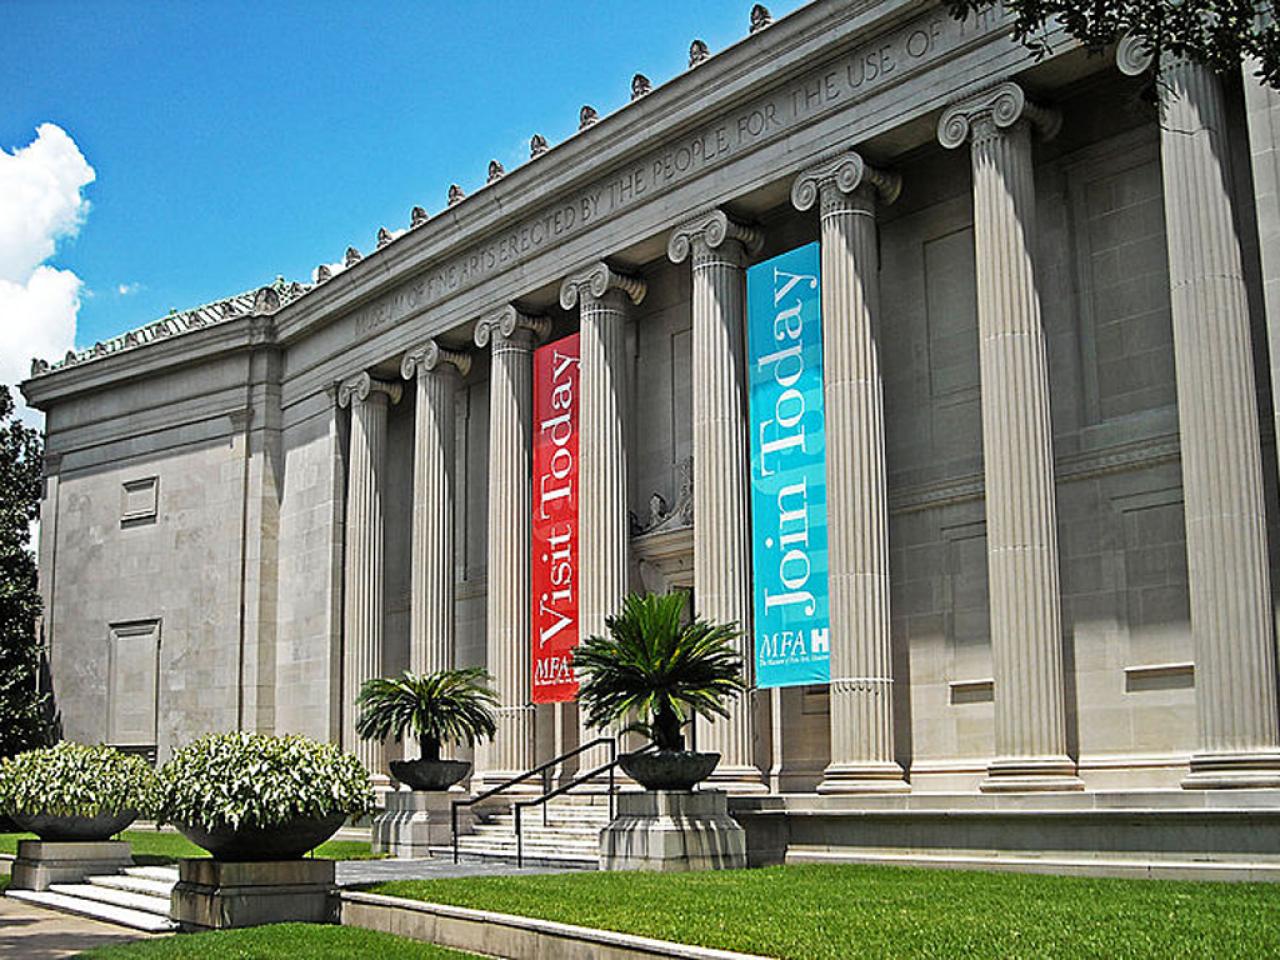 Houston's MustSee Museums Travel Channel Travel Channel